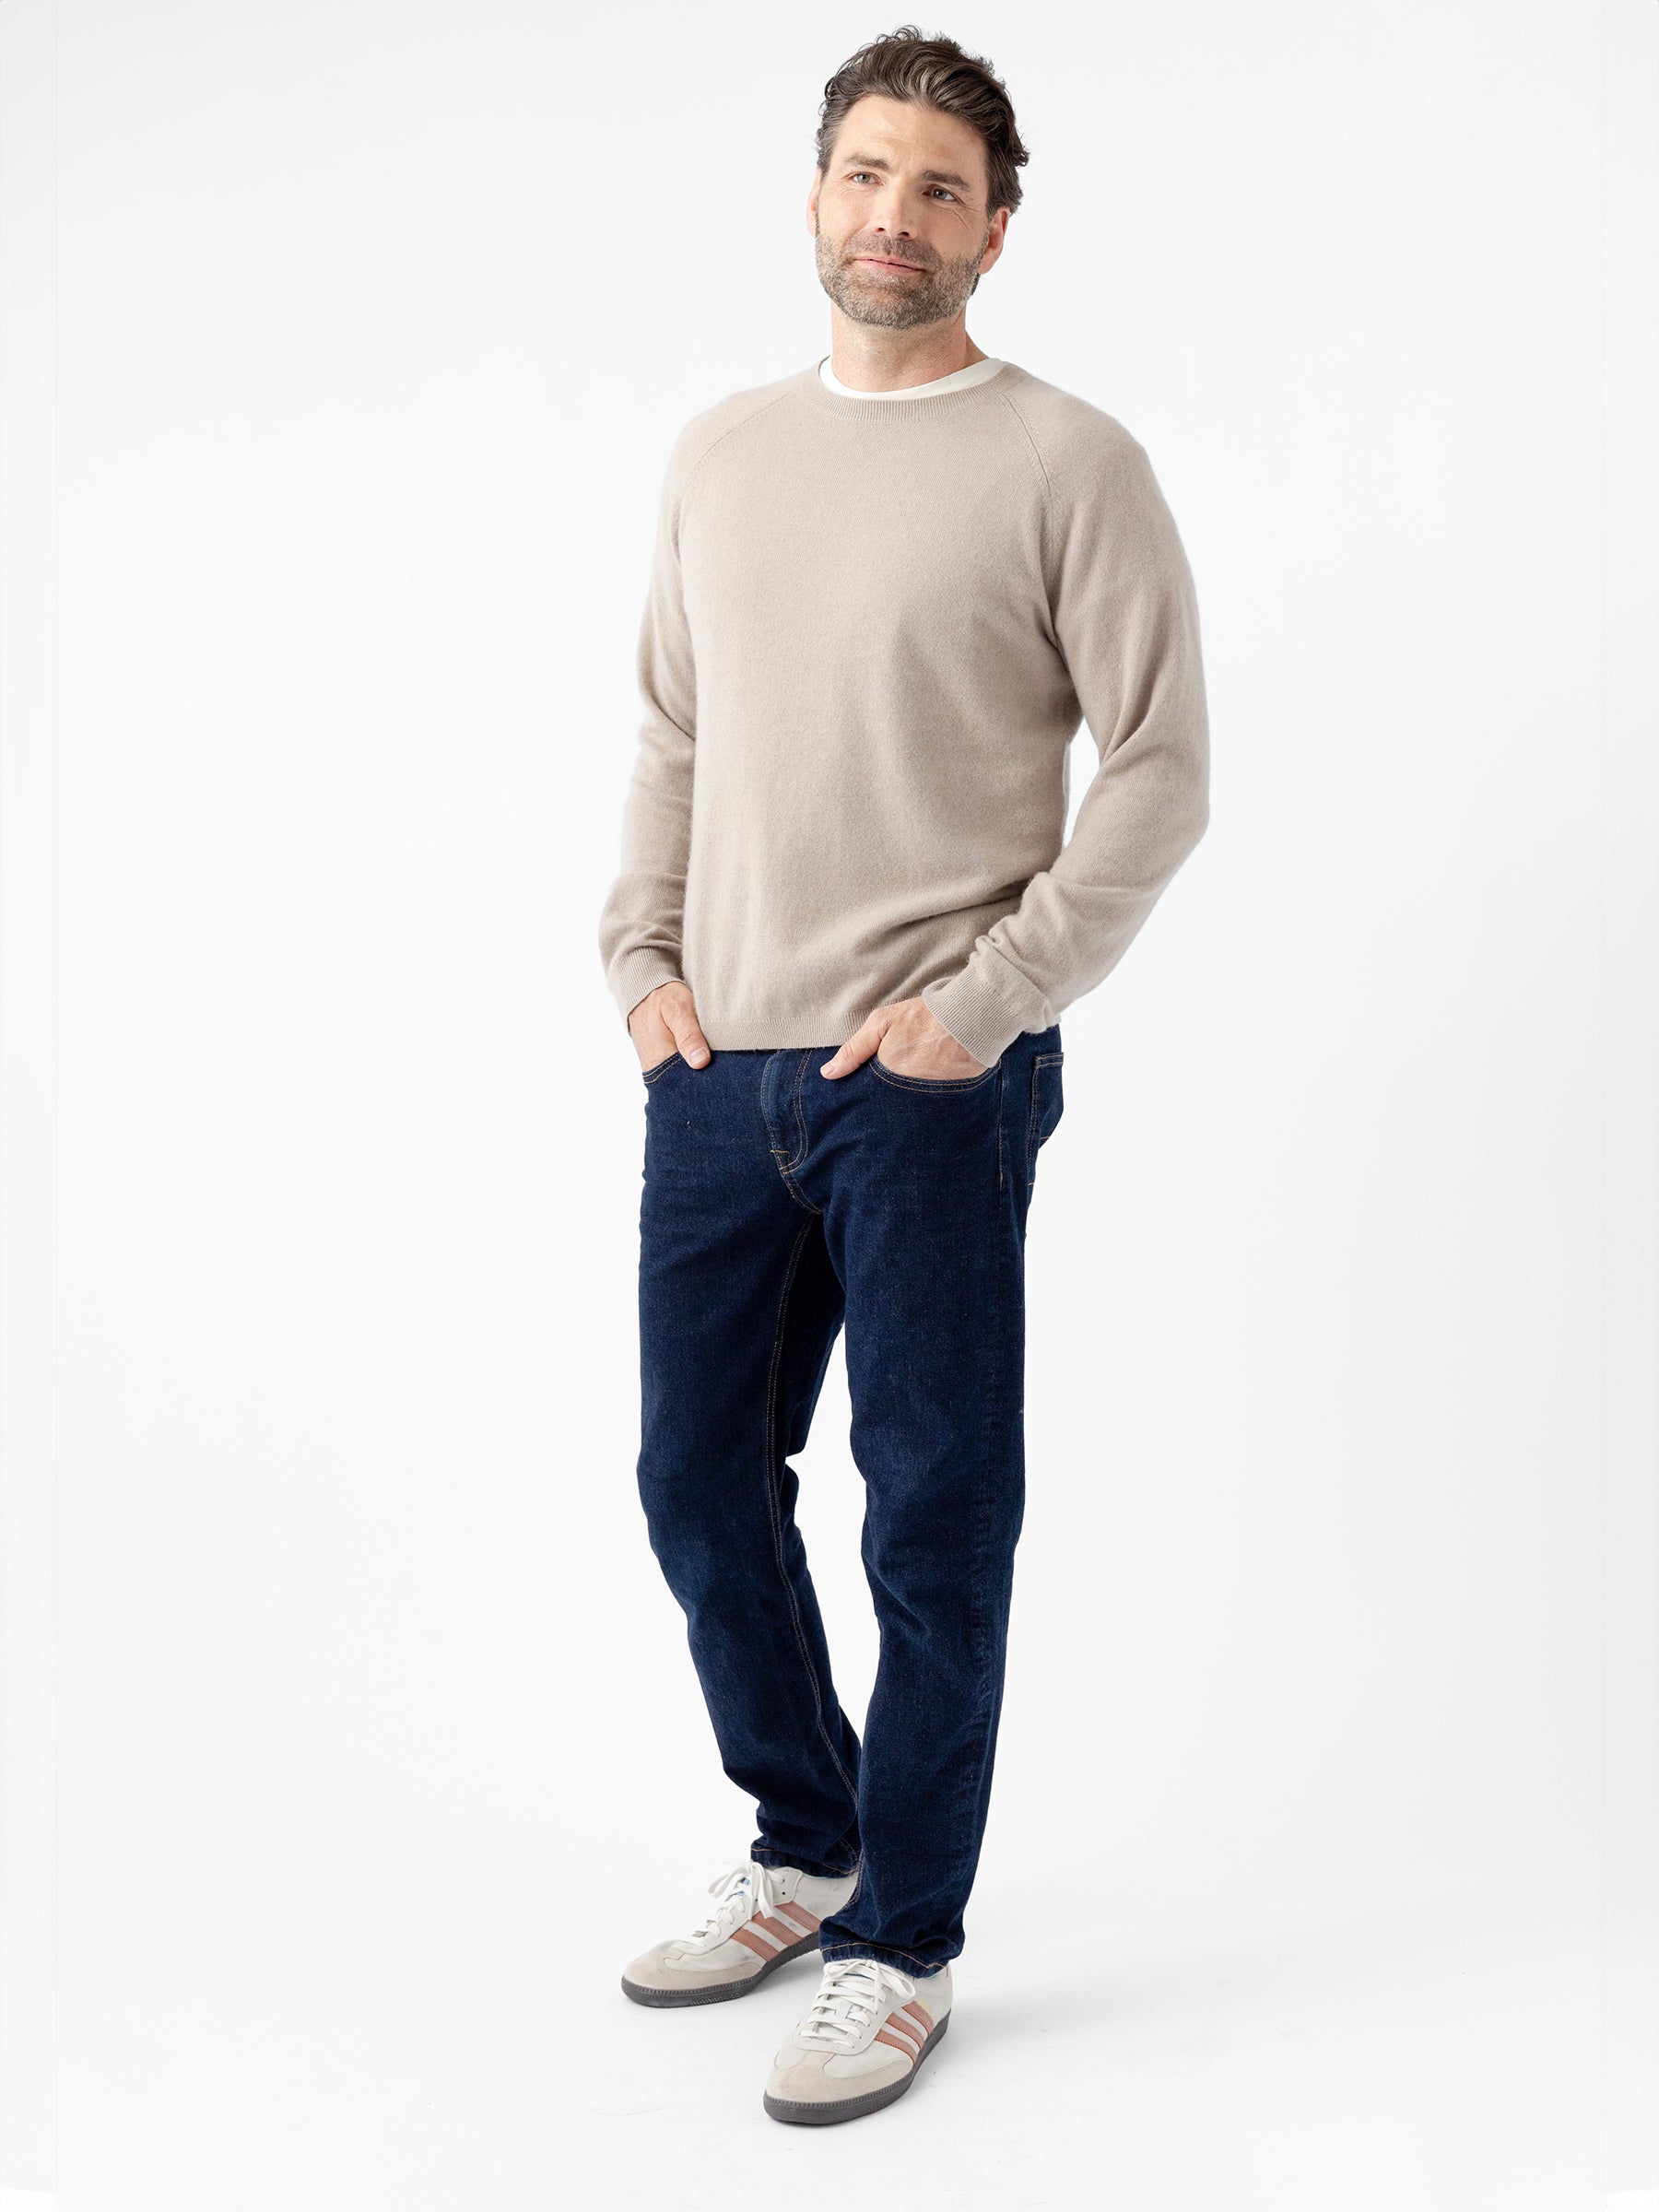 A man stands against a white background wearing a Men's Crewneck Sweater by Cozy Earth, dark blue jeans, and gray sneakers with white and red accents. He has his hands in his pockets and is smiling slightly at the camera. |Color:Sandstone